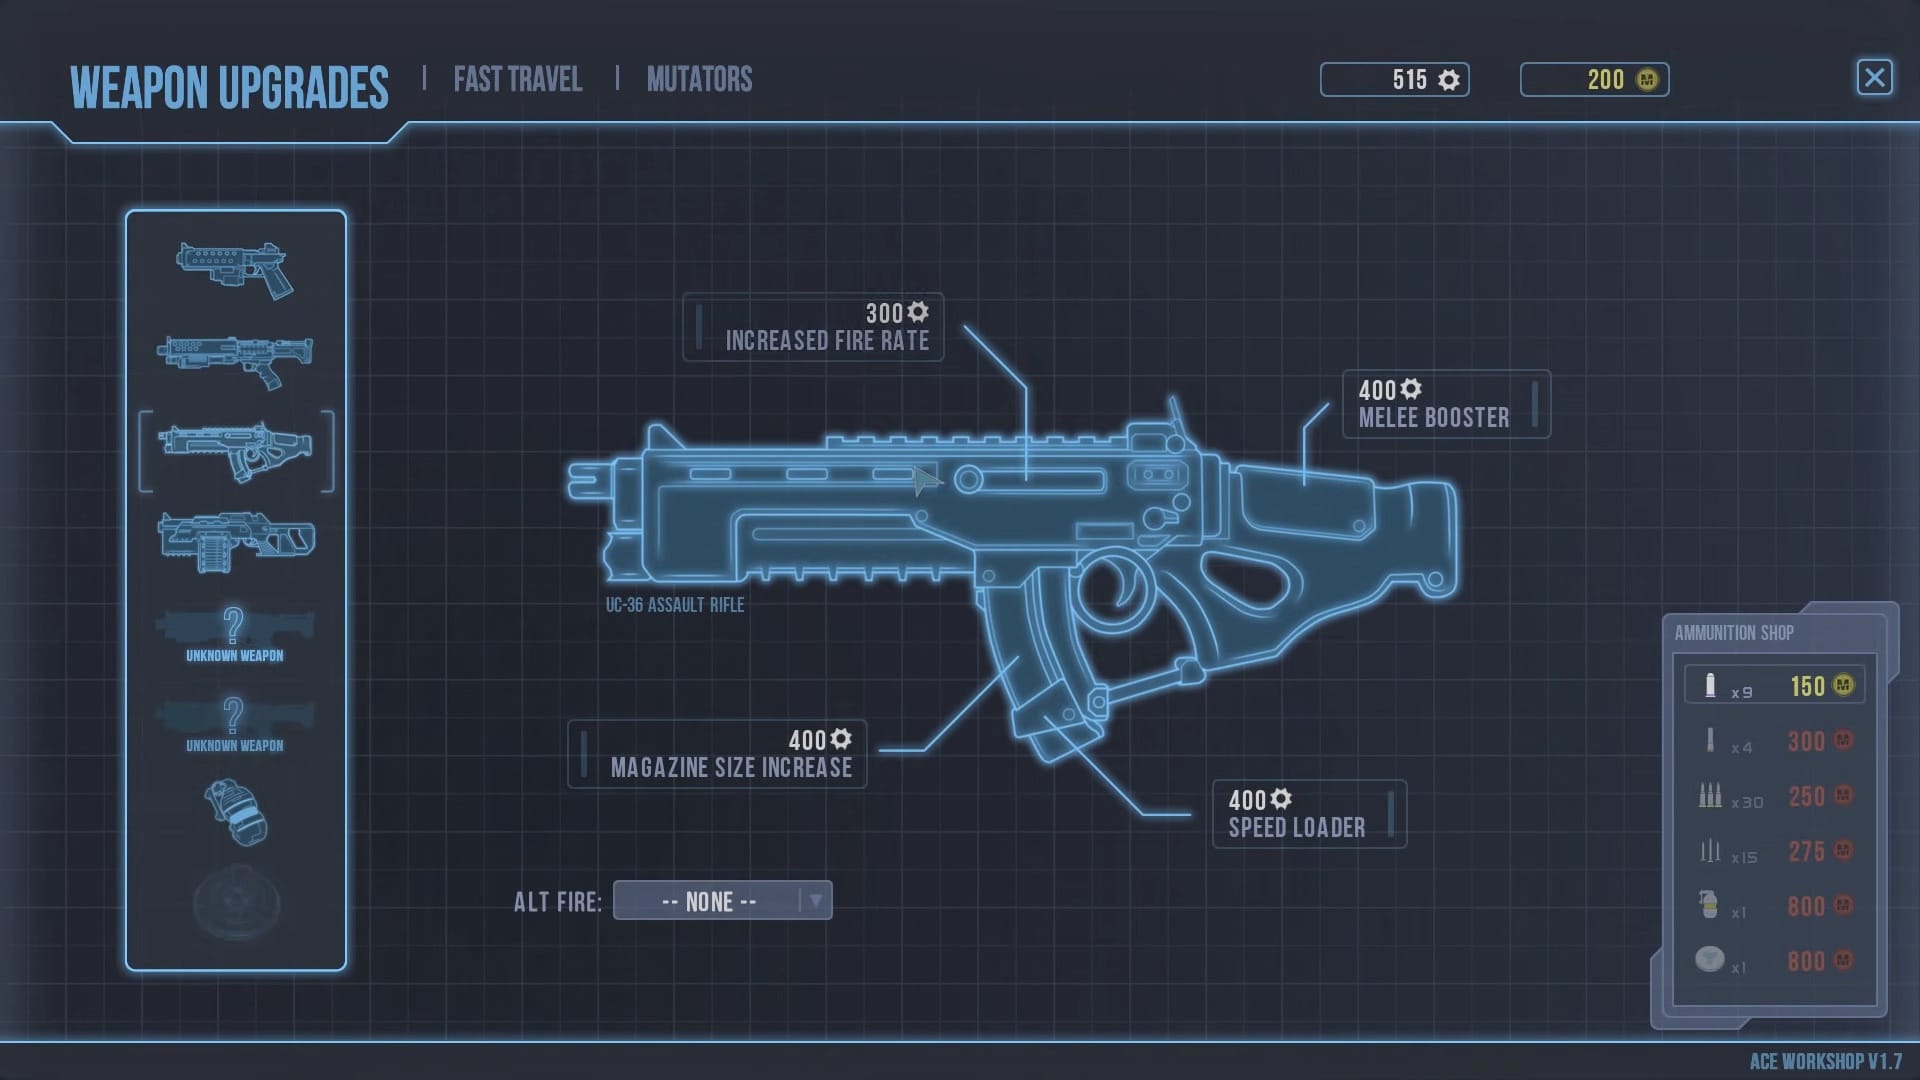 (We can also modify all our weapons to unlock alternative firing modes, for example).